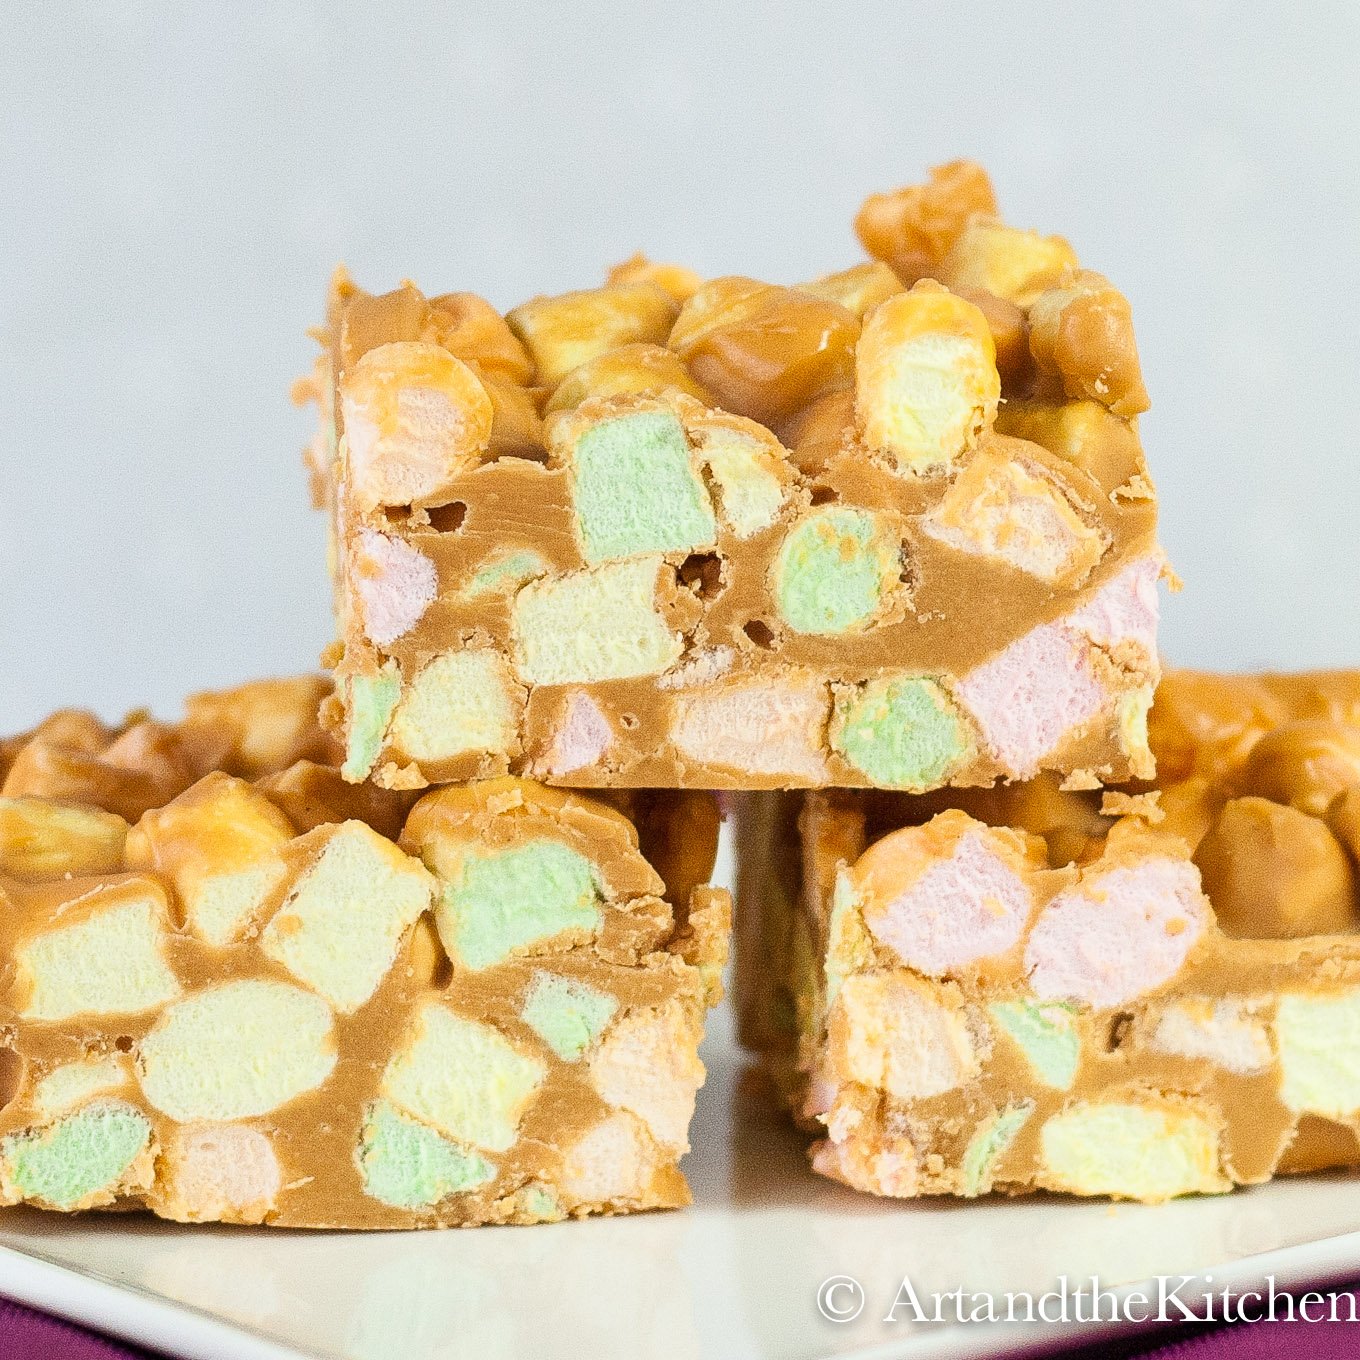 Confetti Squares also known as peanut butter marshmallow squares are addictively delicious. Made with colourful mini marshmallows, peanut butter and butterscotch chips.